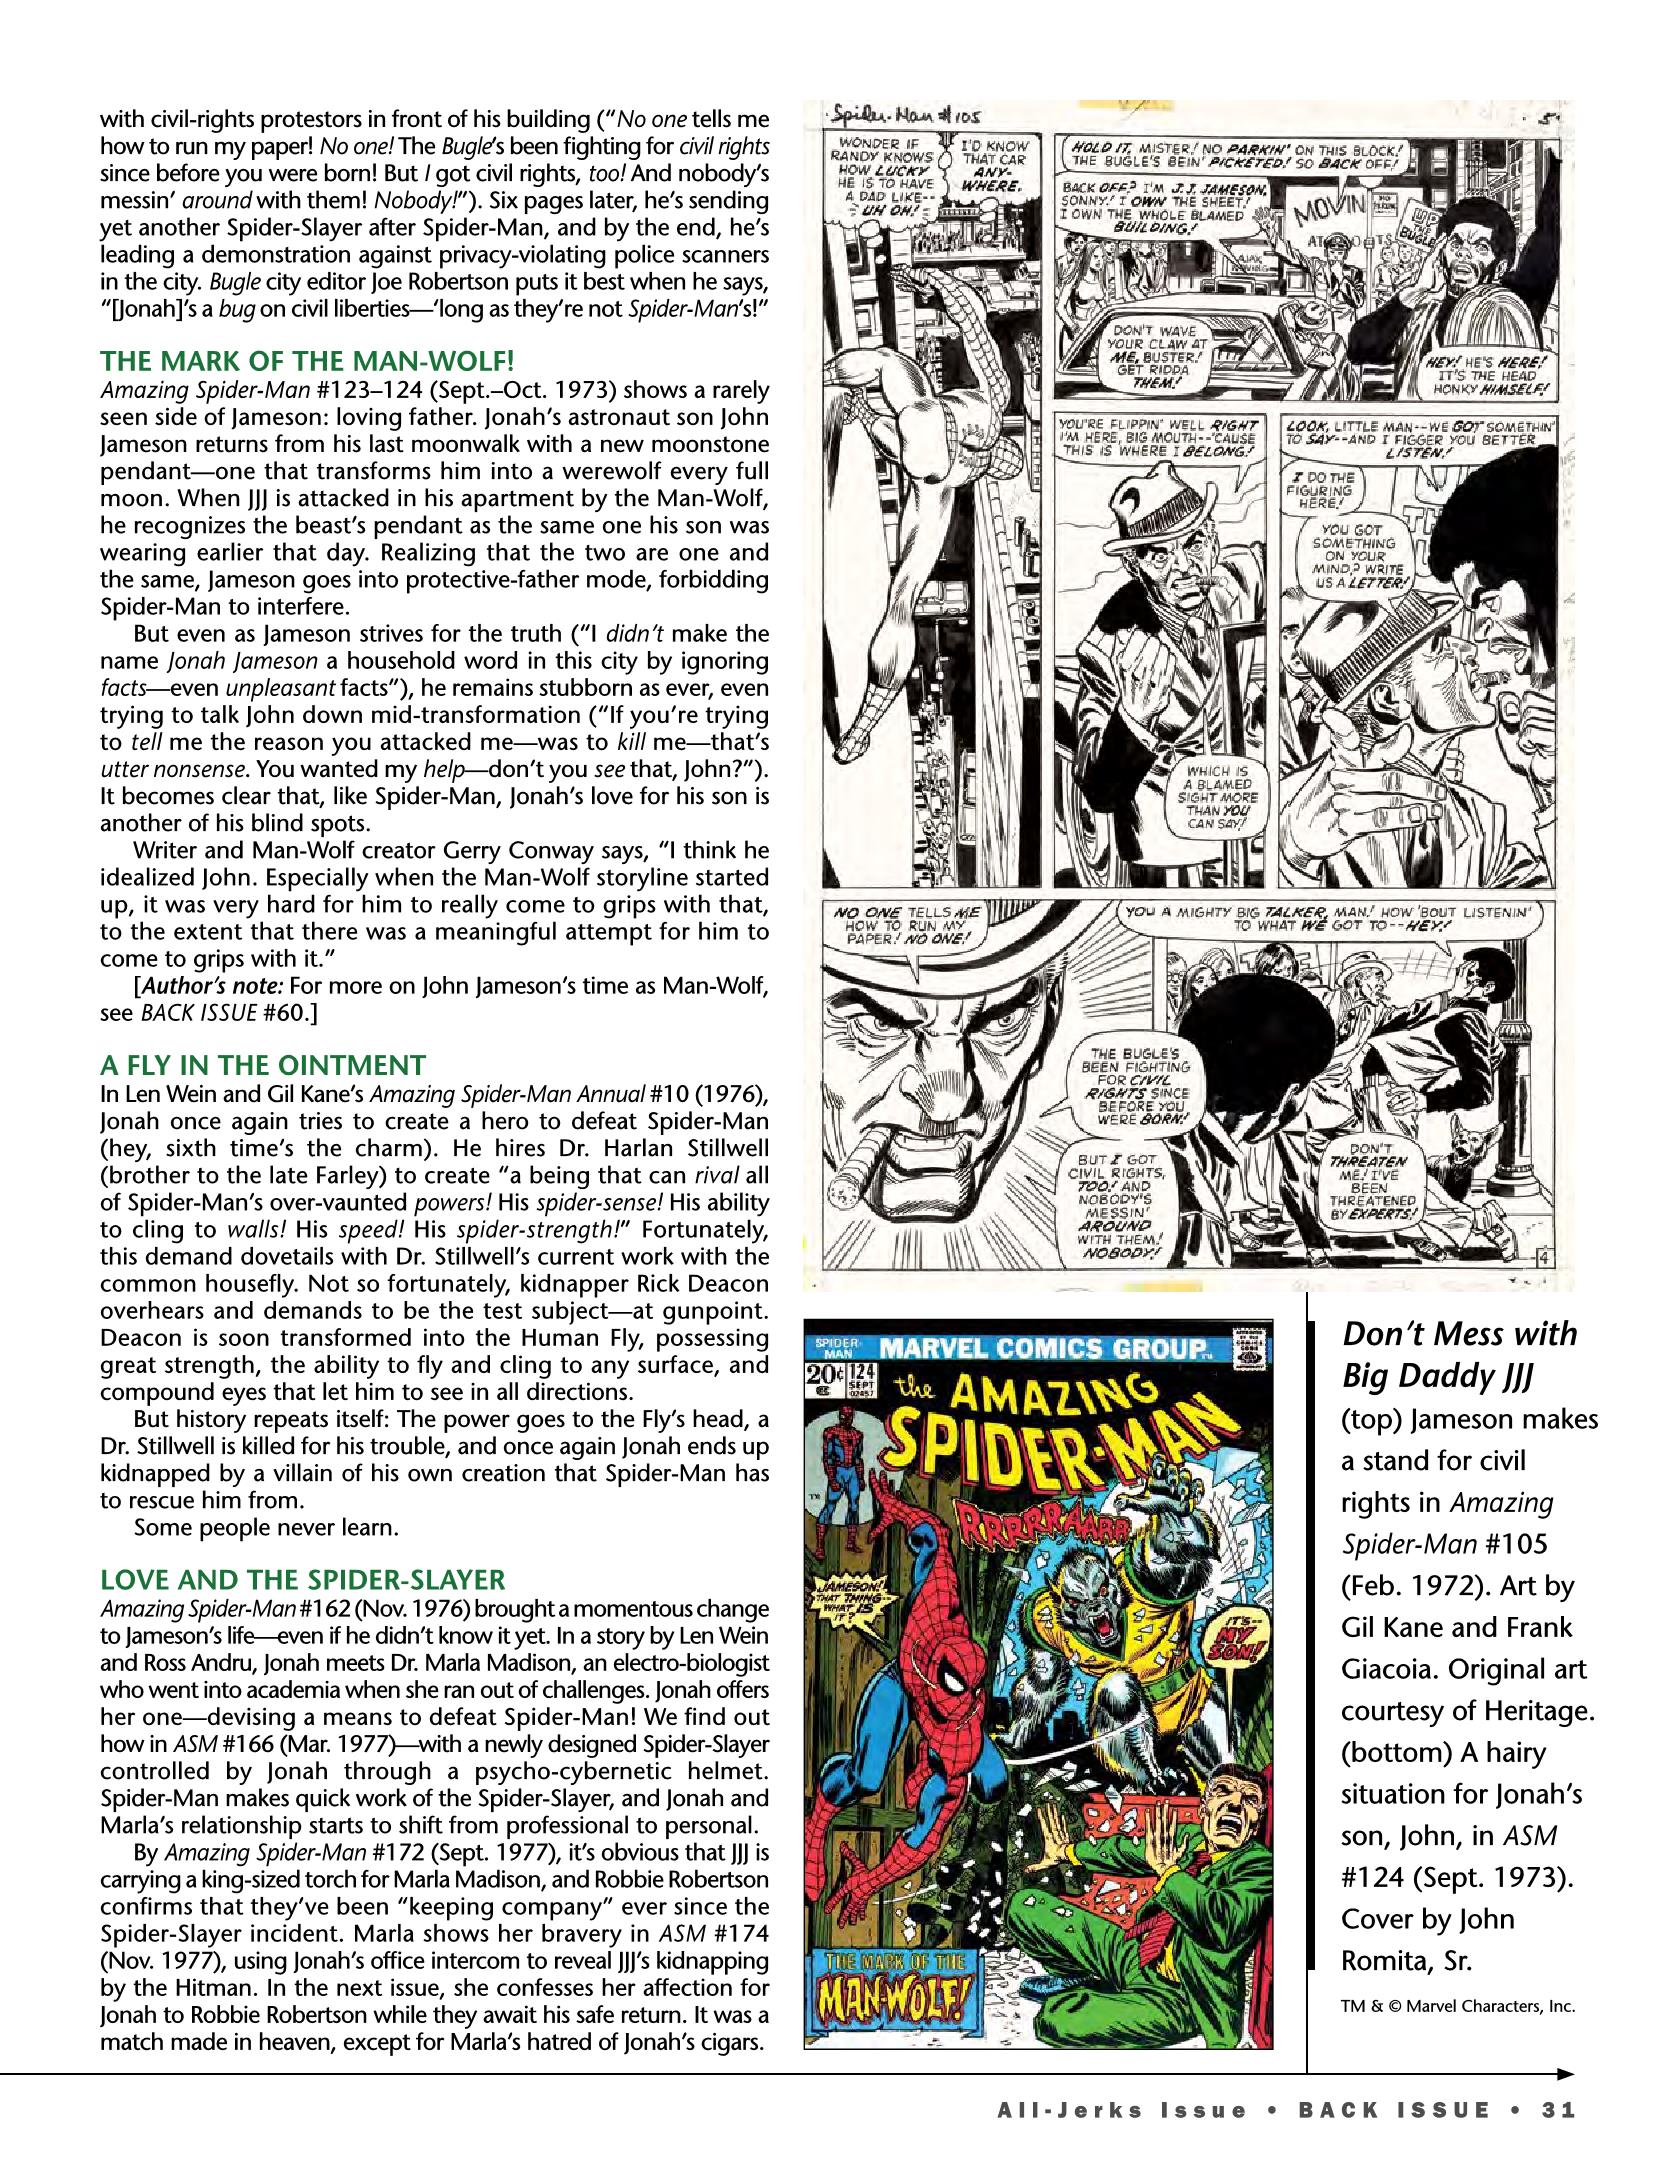 Read online Back Issue comic -  Issue #91 - 27